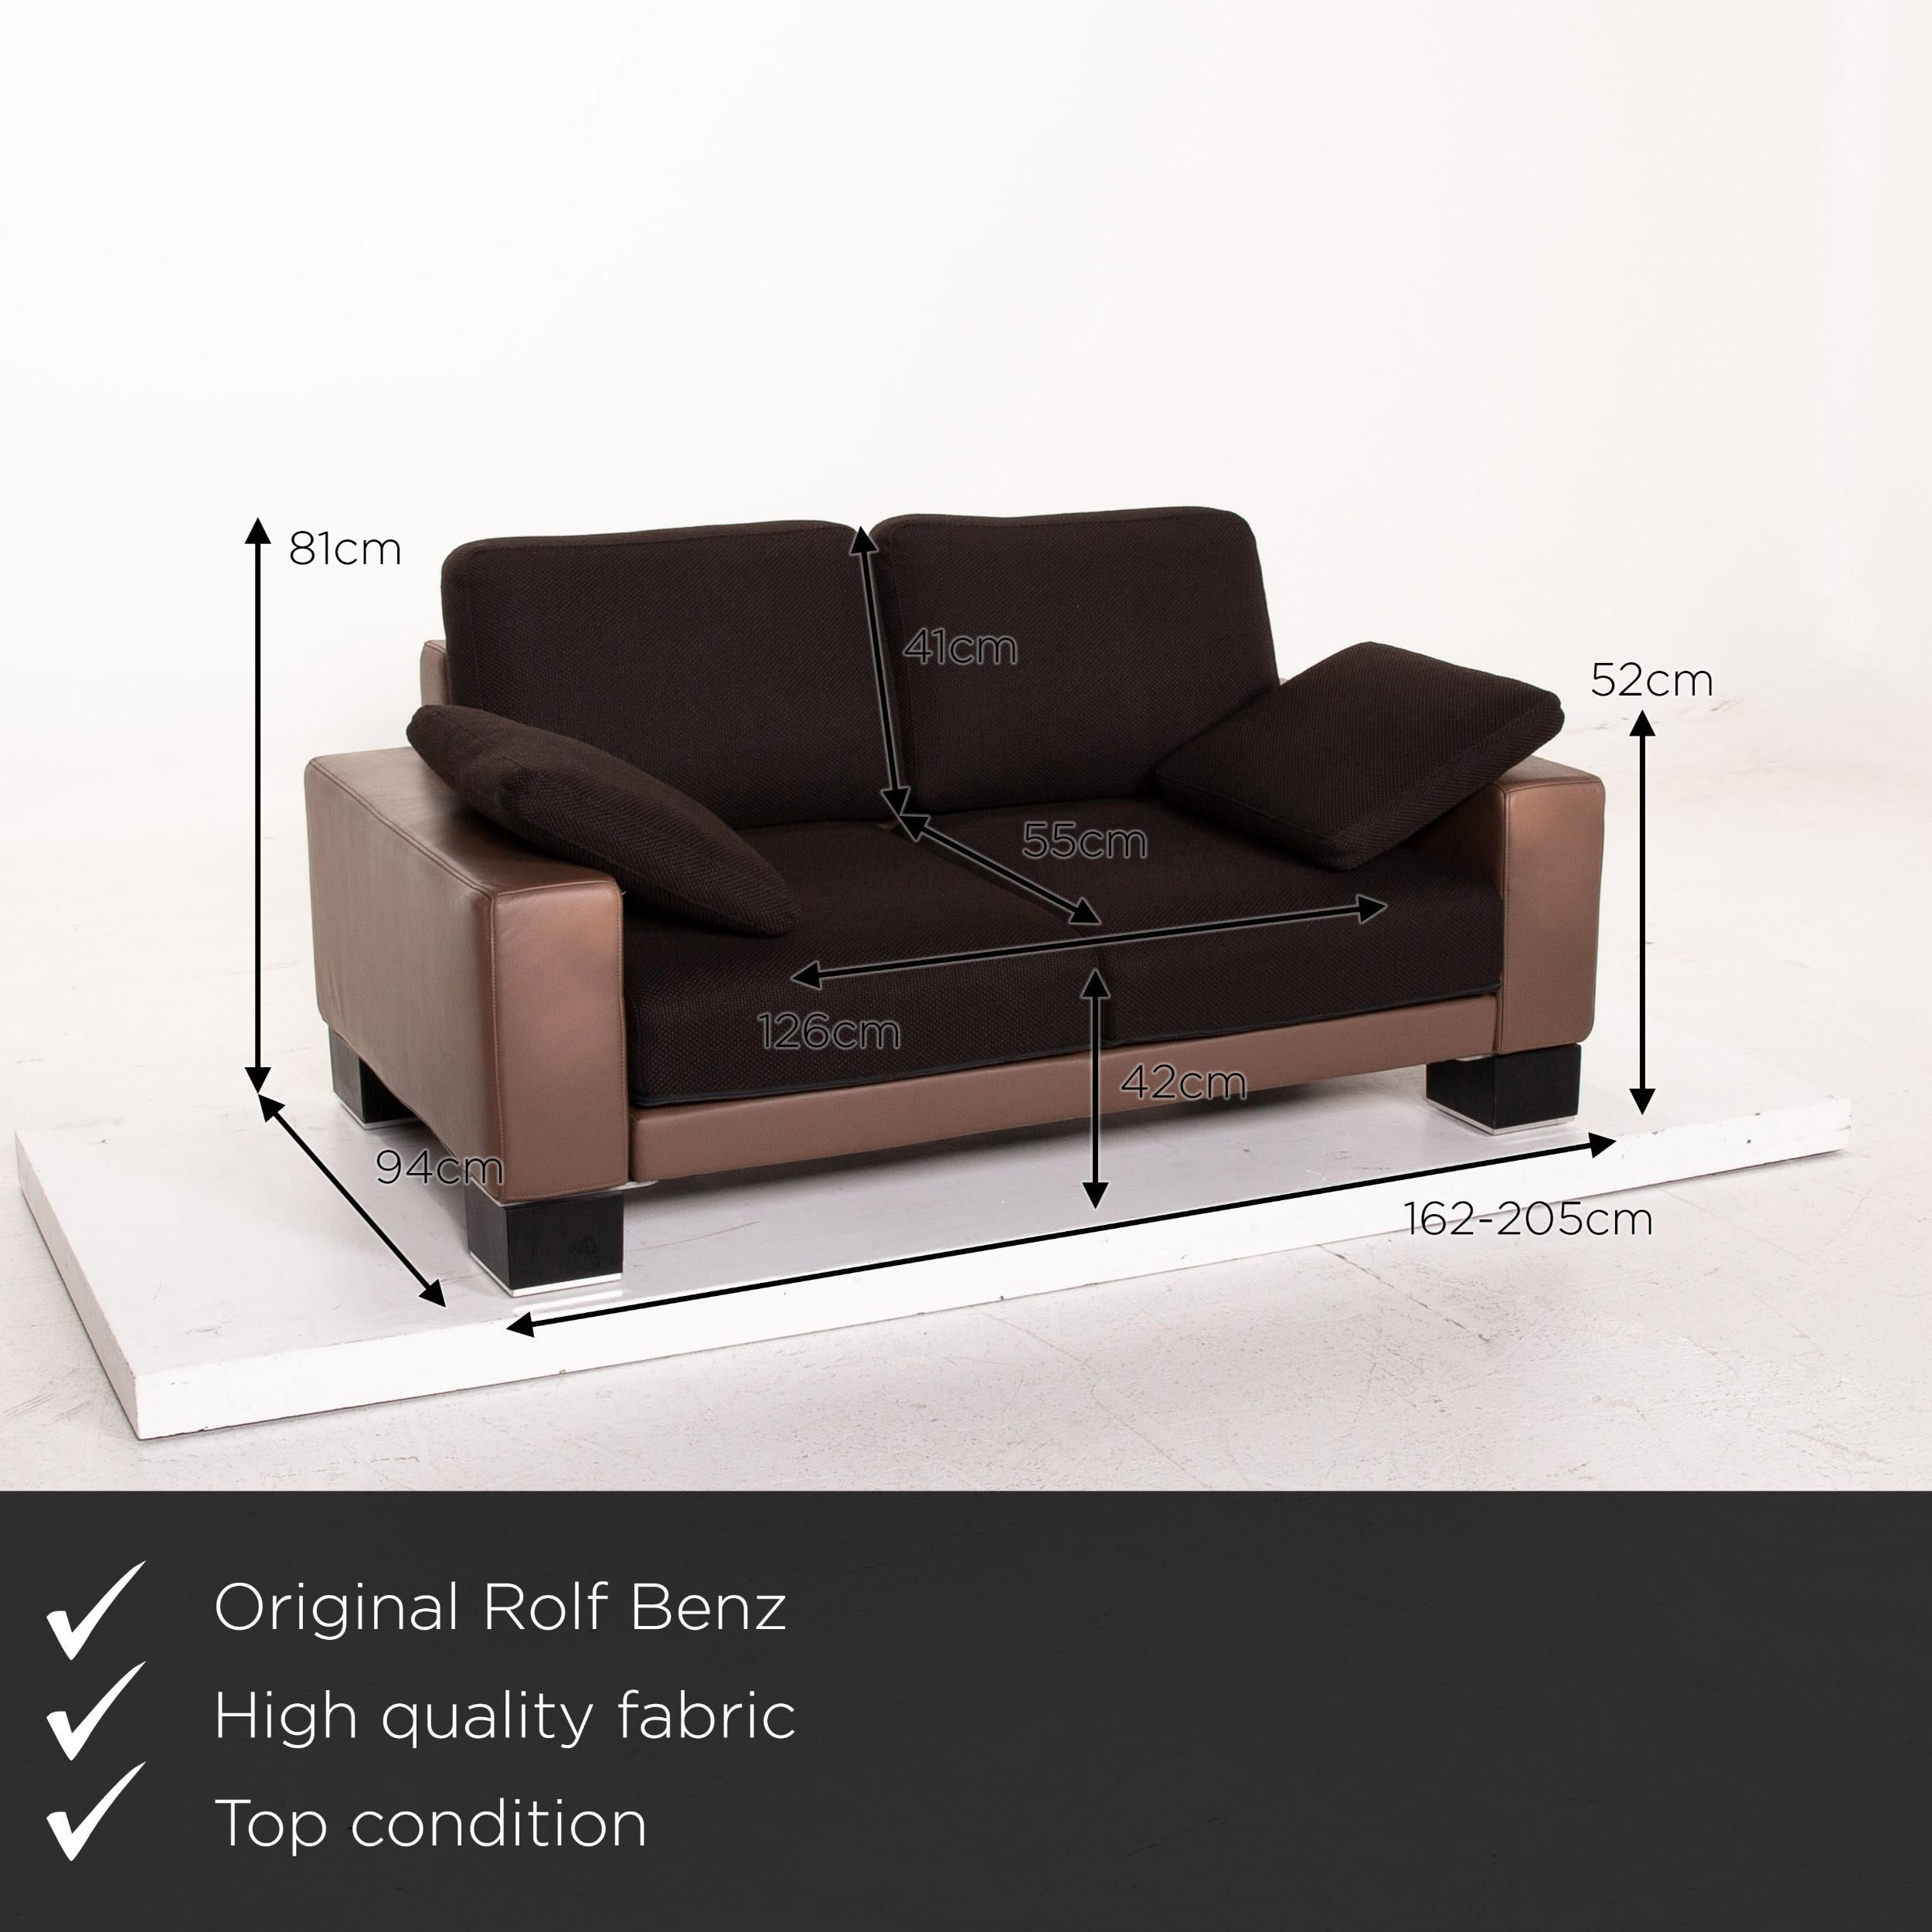 We present to you a Rolf Benz Ego leather fabric sofa brown dark brown two-seat function couch.


 Product measurements in centimeters:
 

Depth 94
Width 162
Height 81
Seat height 42
Rest height 52
Seat depth 55
Seat width 126
Back